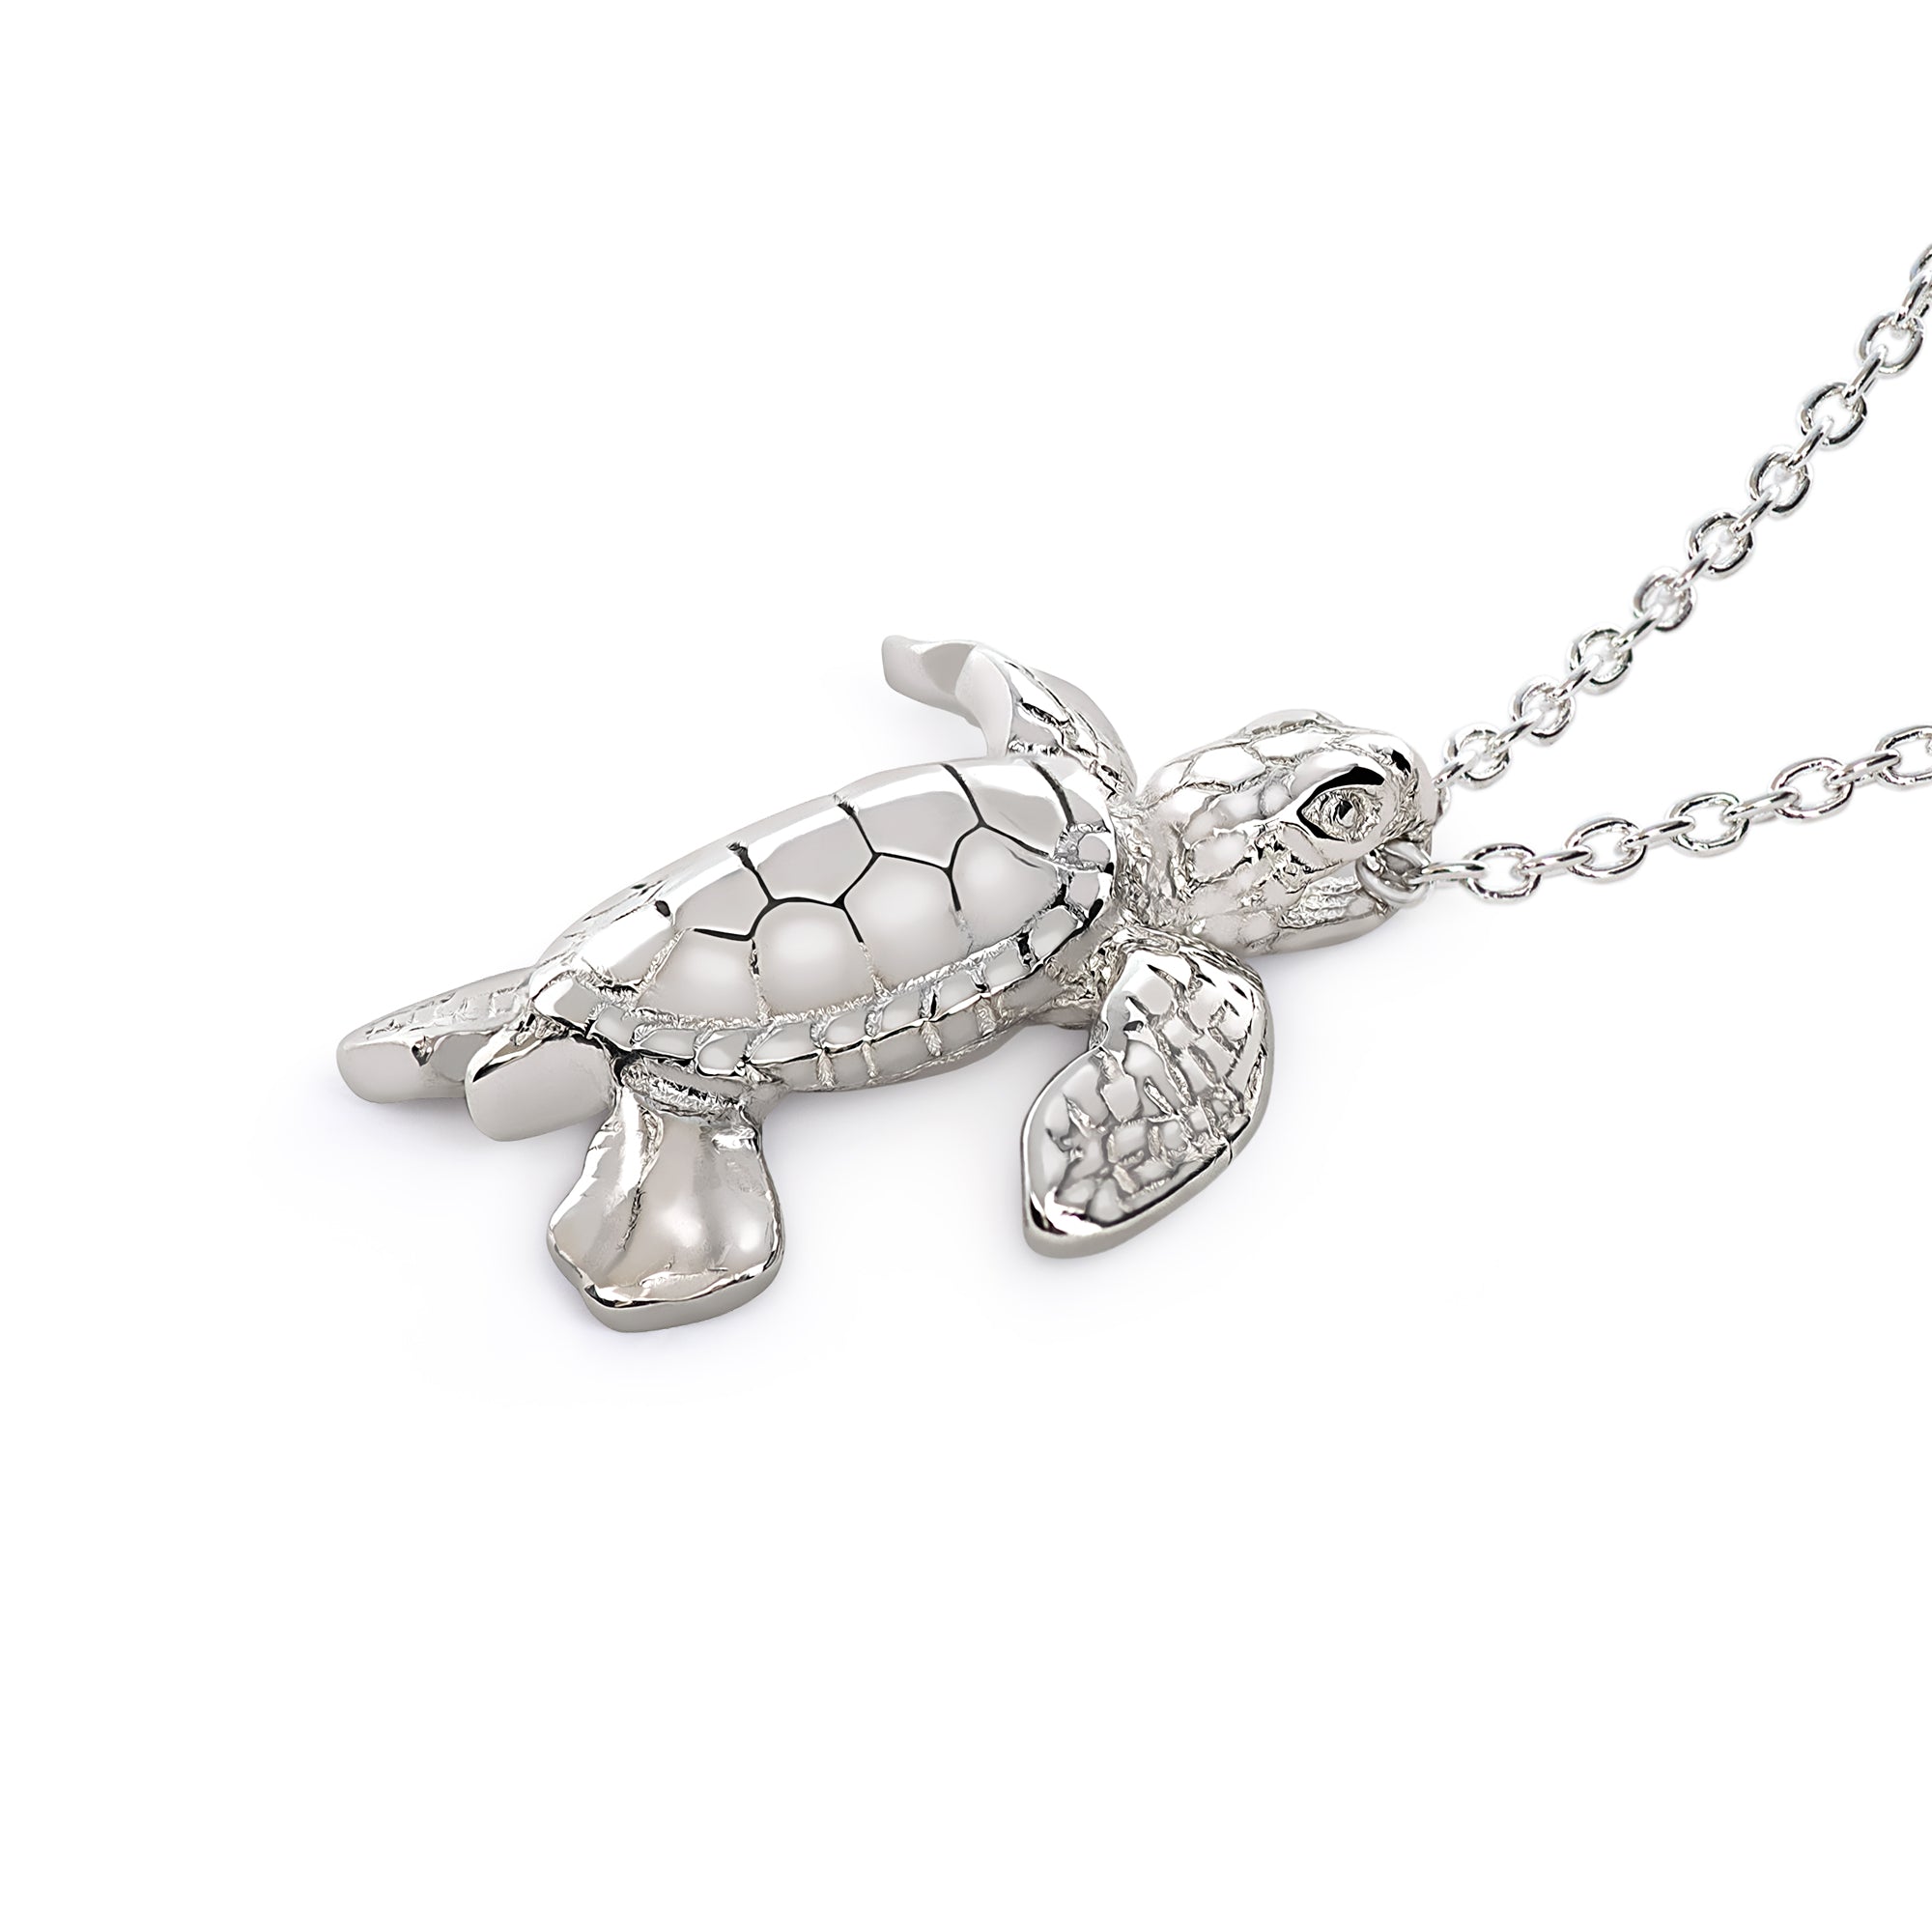 Turtle Pendant Charms, Pewter, Antique Silver, Lead Free, 34x22mm, Lot -  Jewelry Tool Box